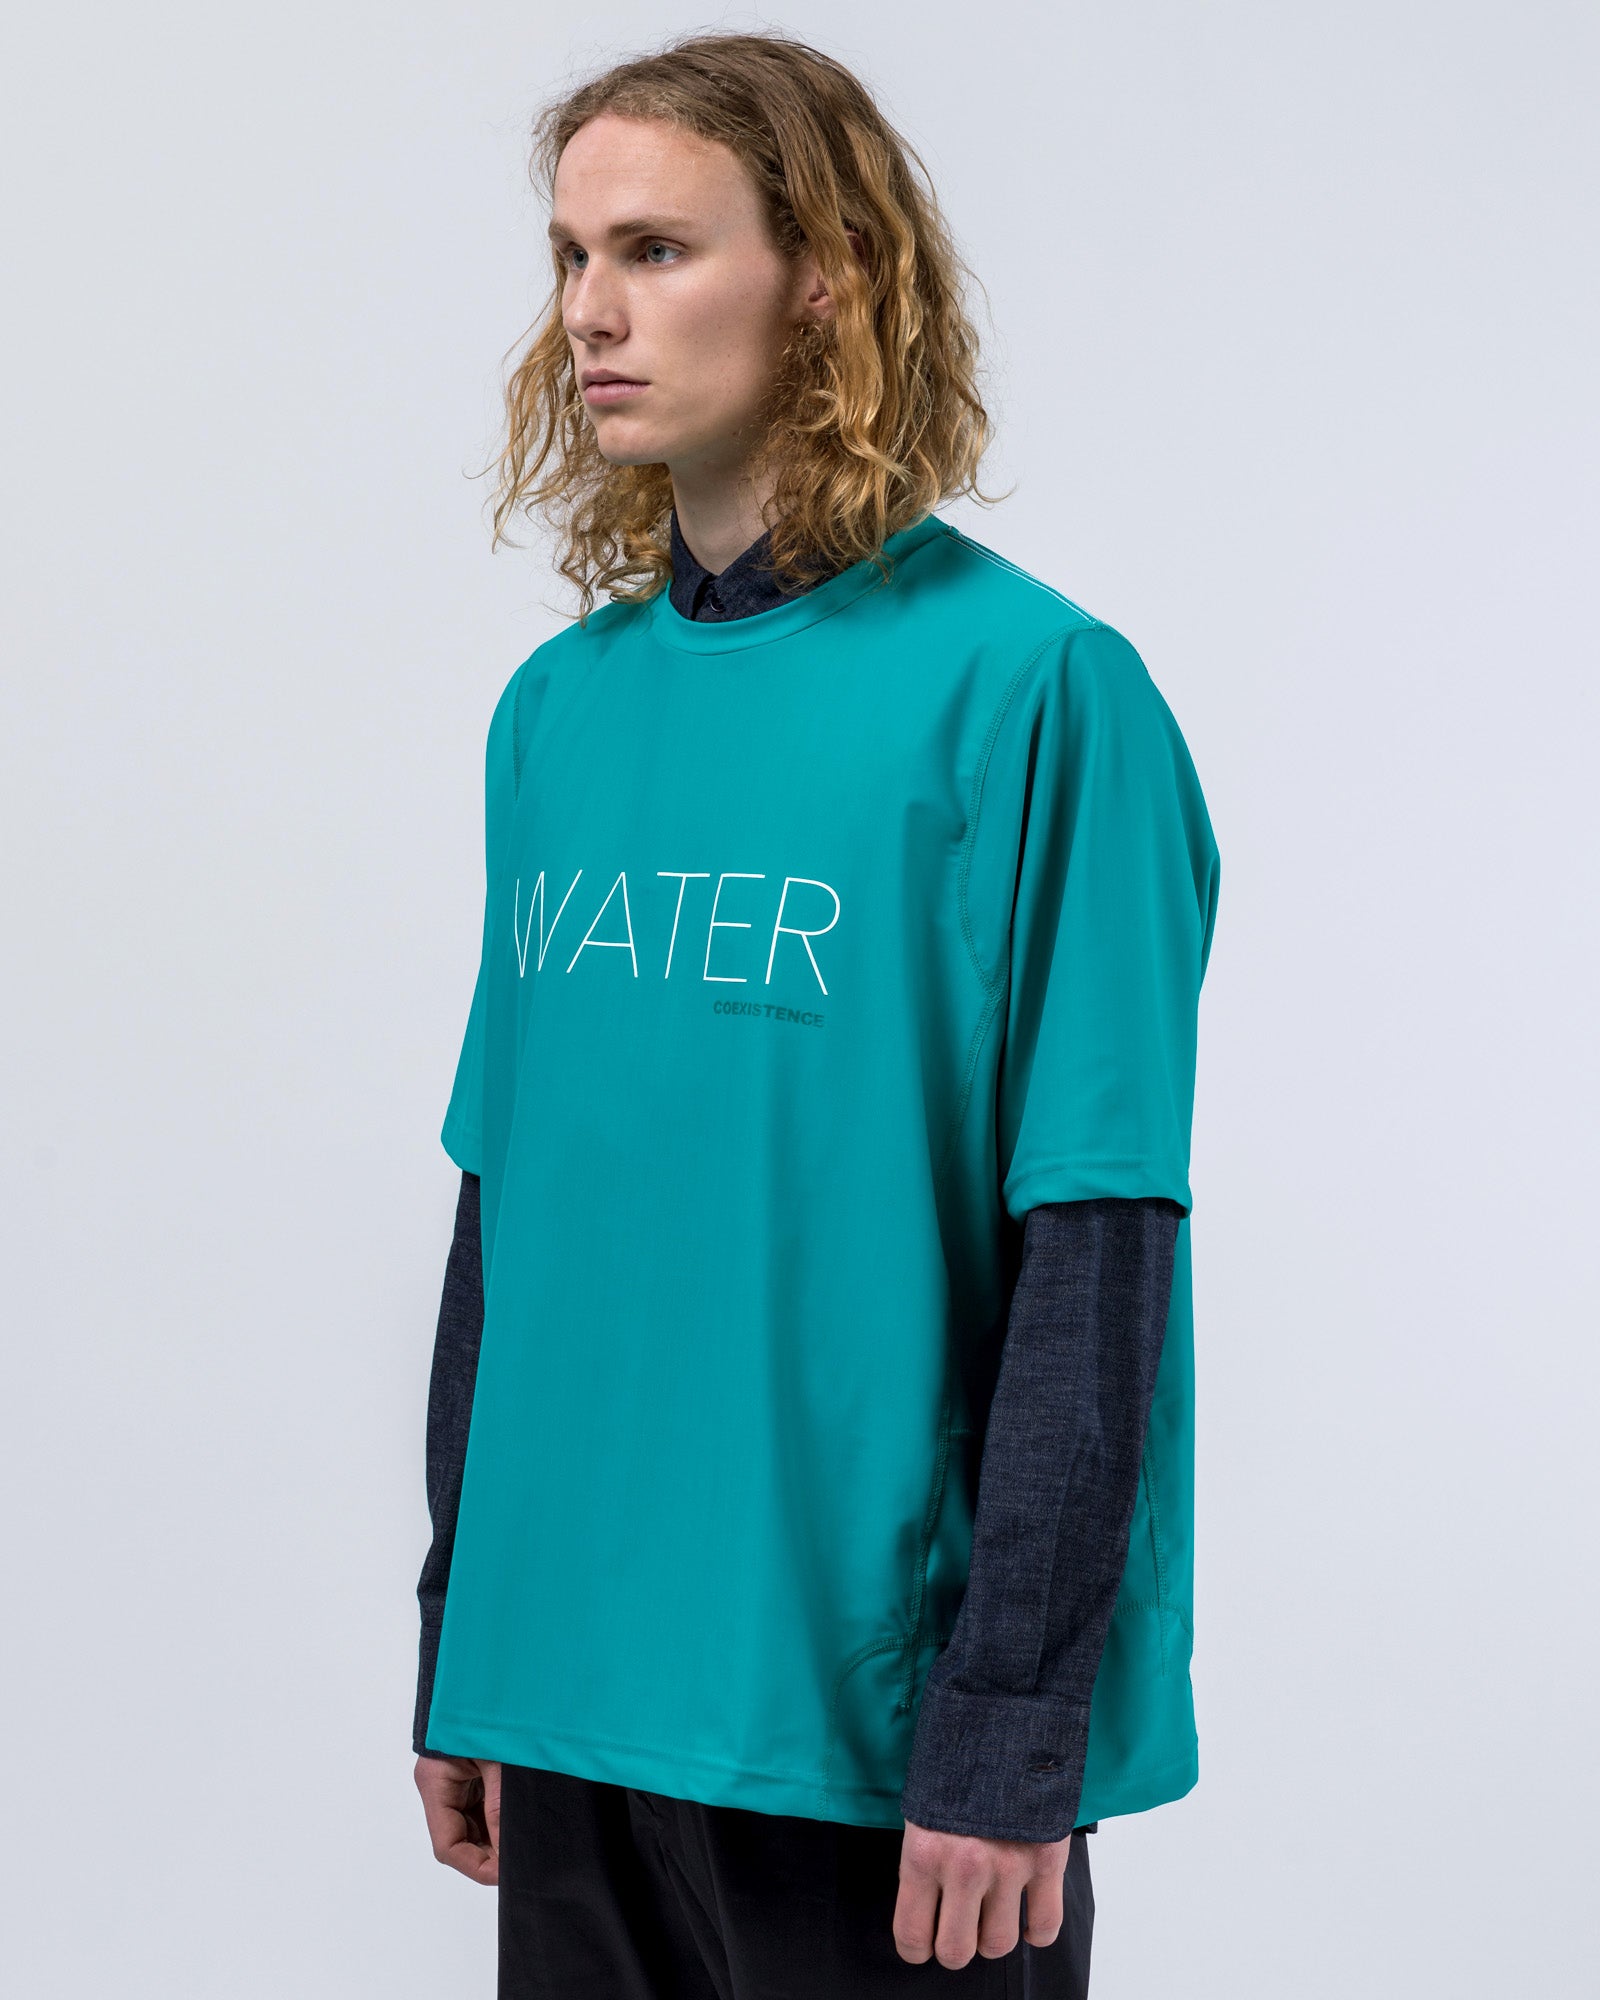 Water T-Shirt in Blue Green